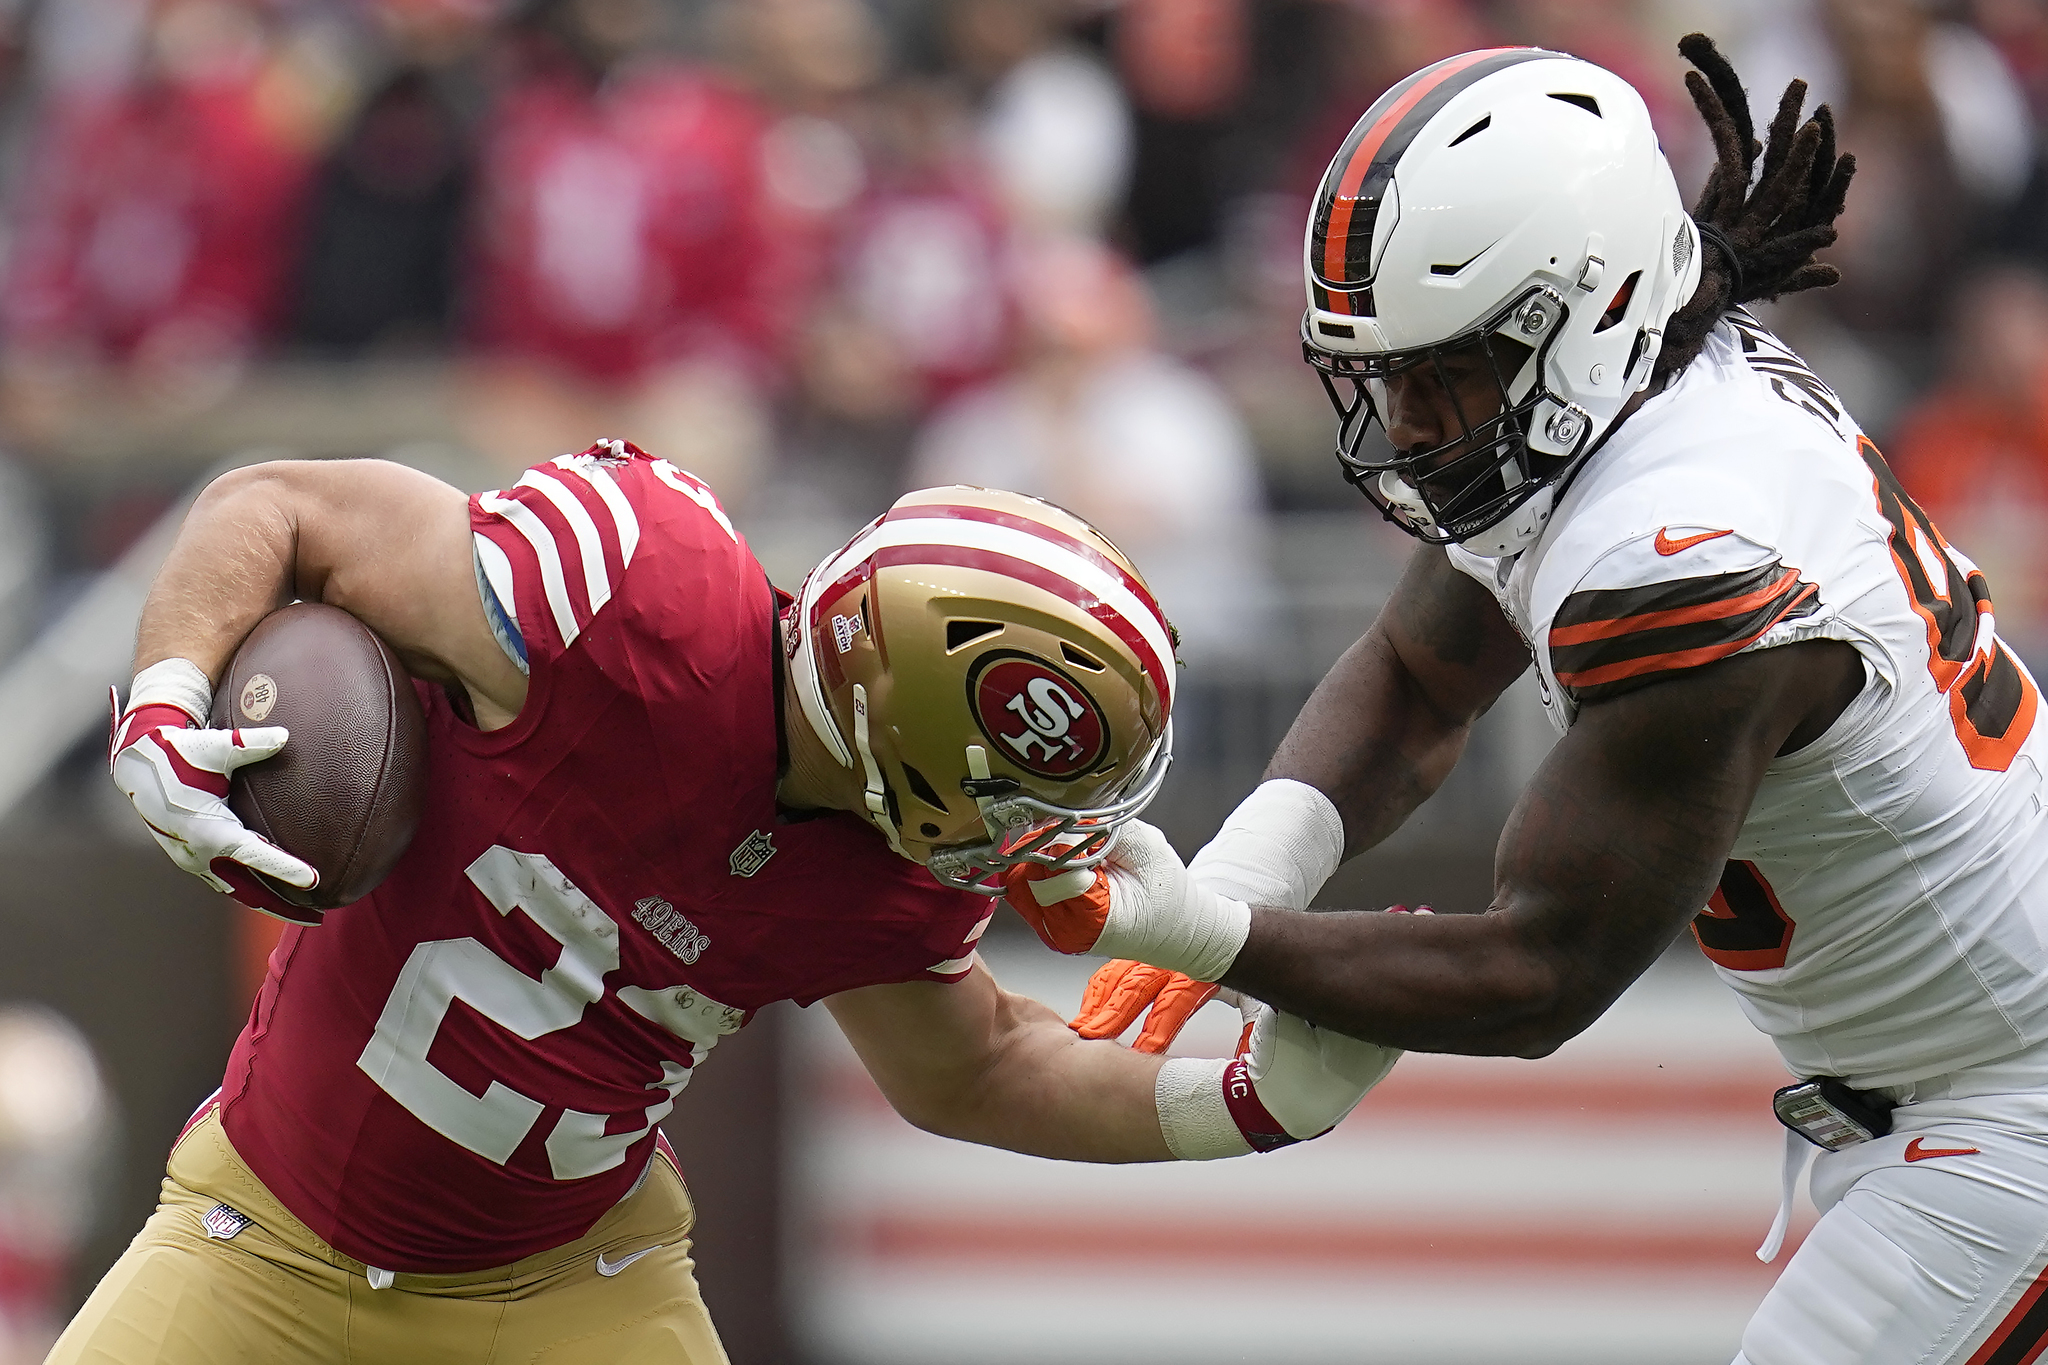 Cleveland Browns defensive end Za'Darius Smith, right, grabs the face mask of San Francisco 49ers running back Christian McCaffrey